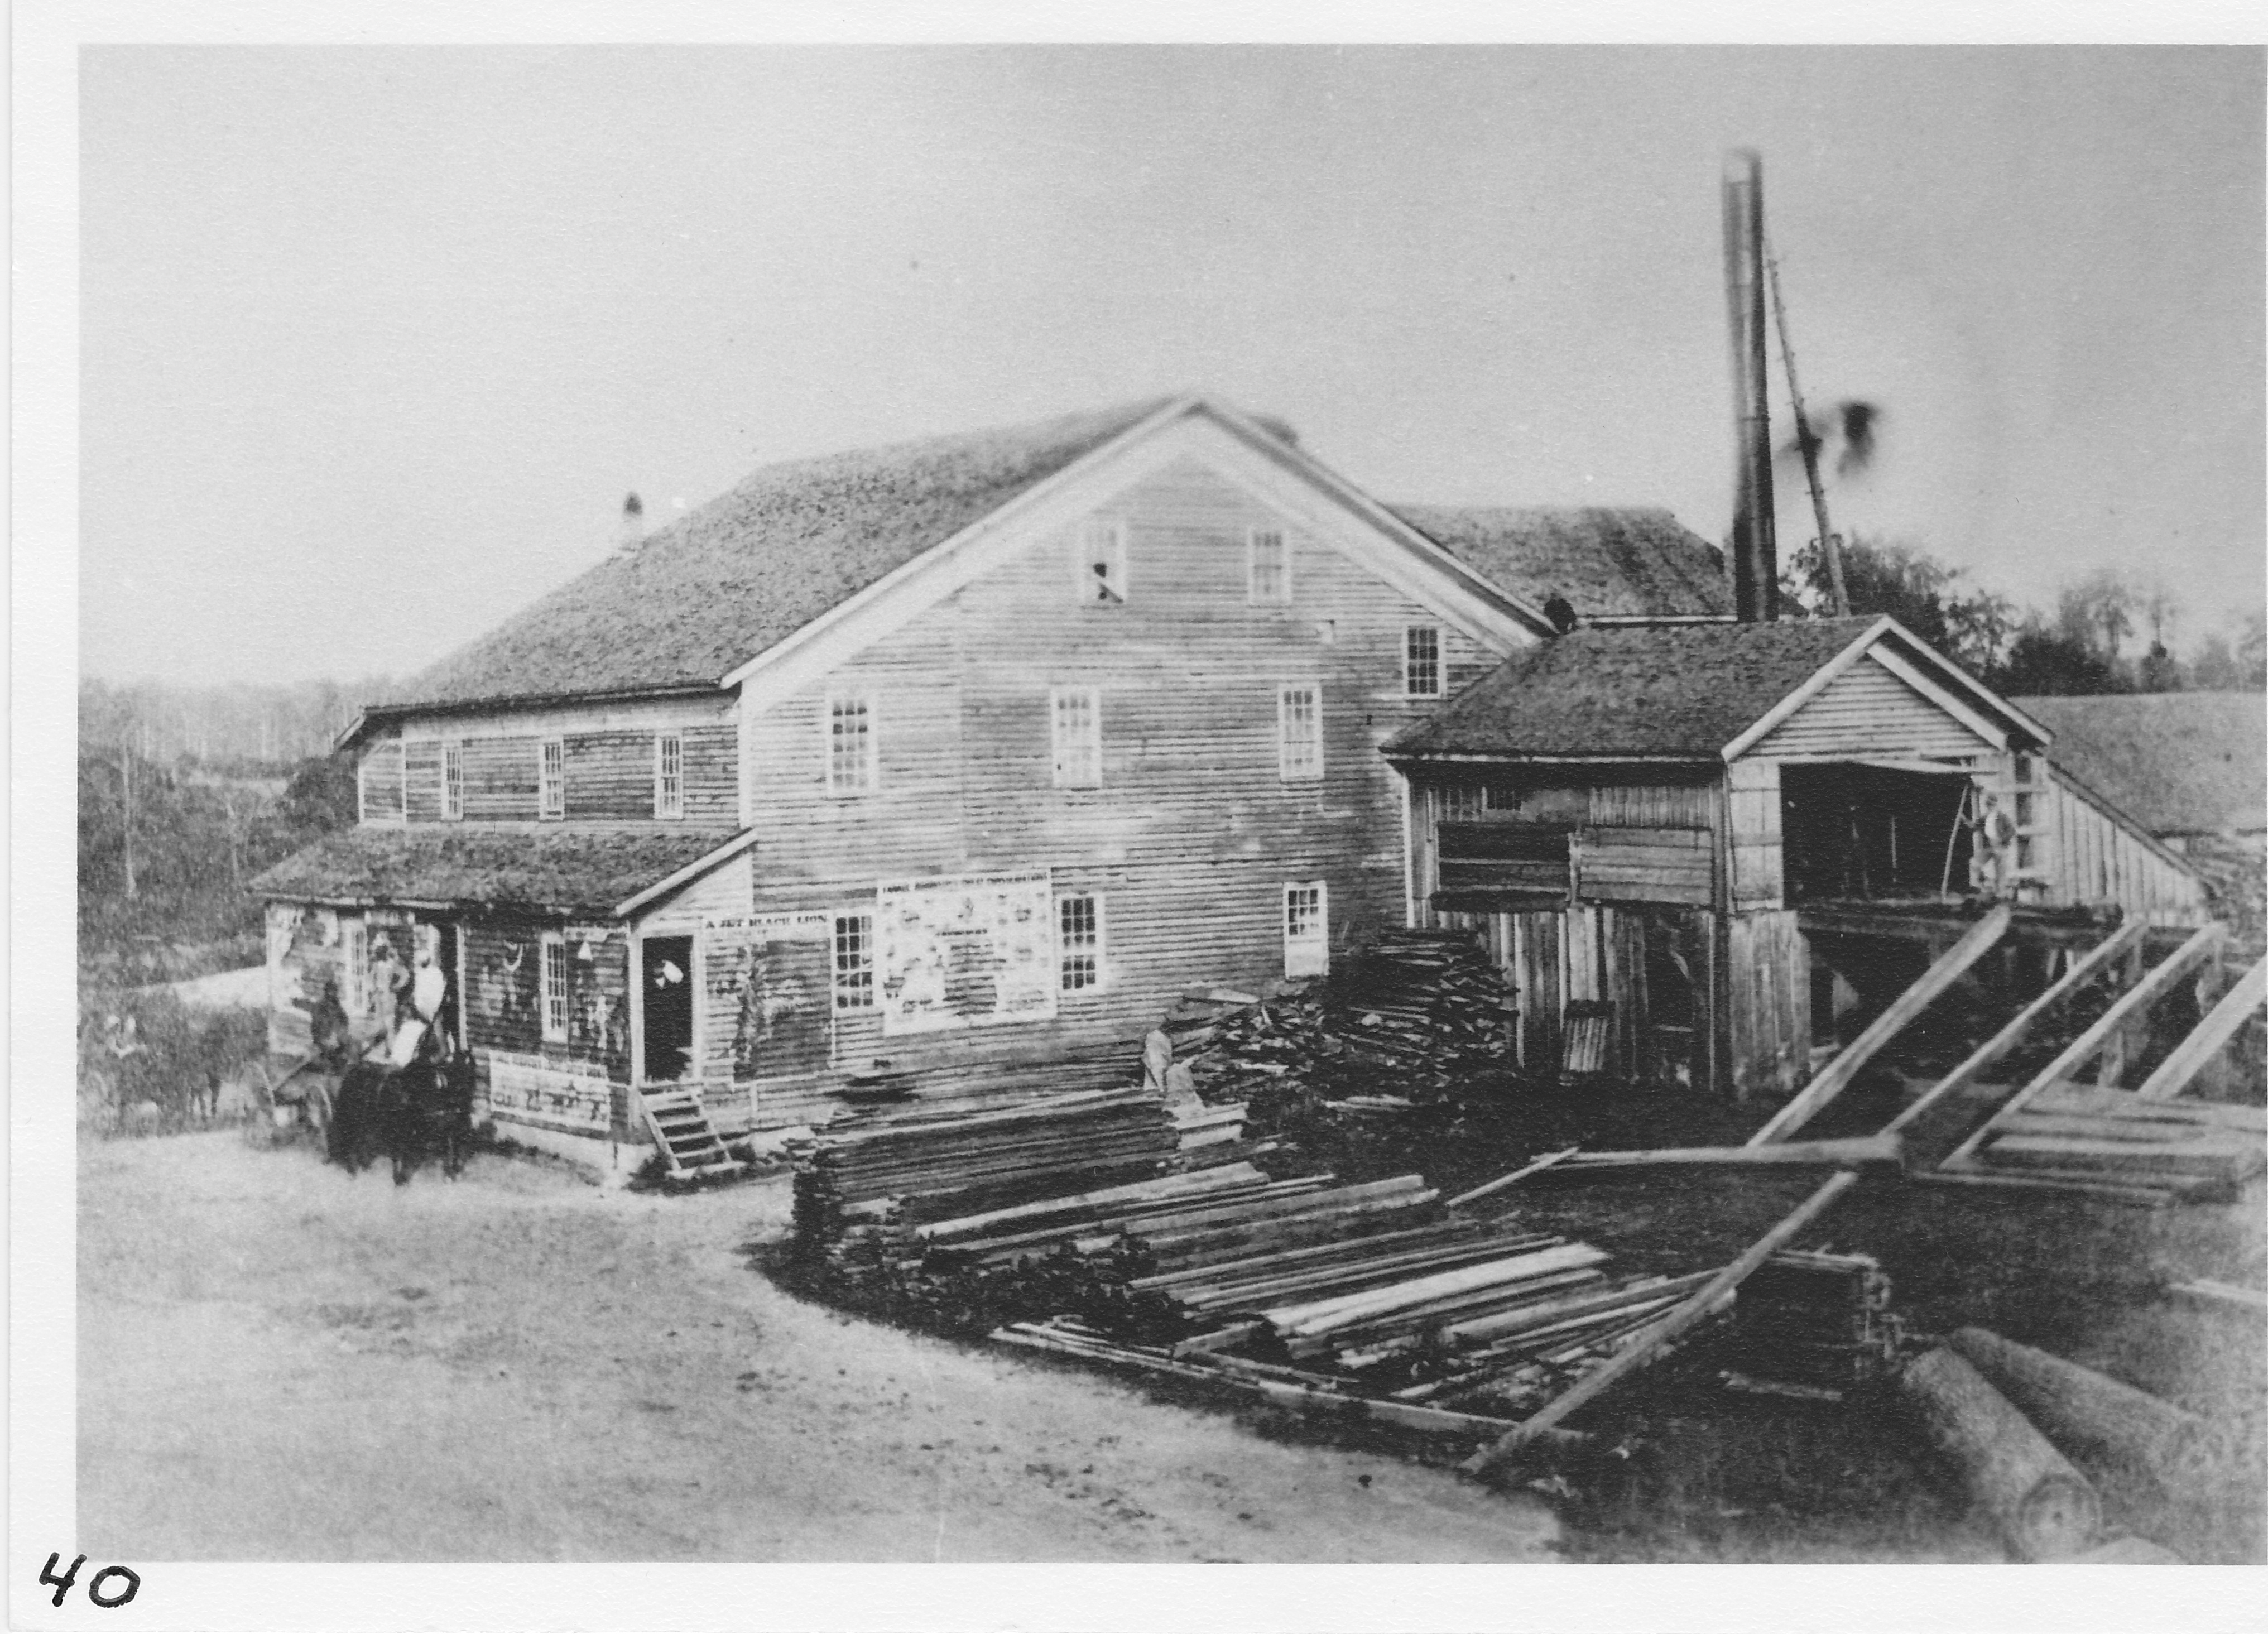 Grist & Saw Mill (stood on site of Stair Auditorium).  In 1846 the mill was moved to this site from Baker’s Corner (Rendel oil tanks now).  Was originally built by Jacob Baker.  Moved by Franklin Cawley. Sold to Ezra Gillis.  Burned in1896.